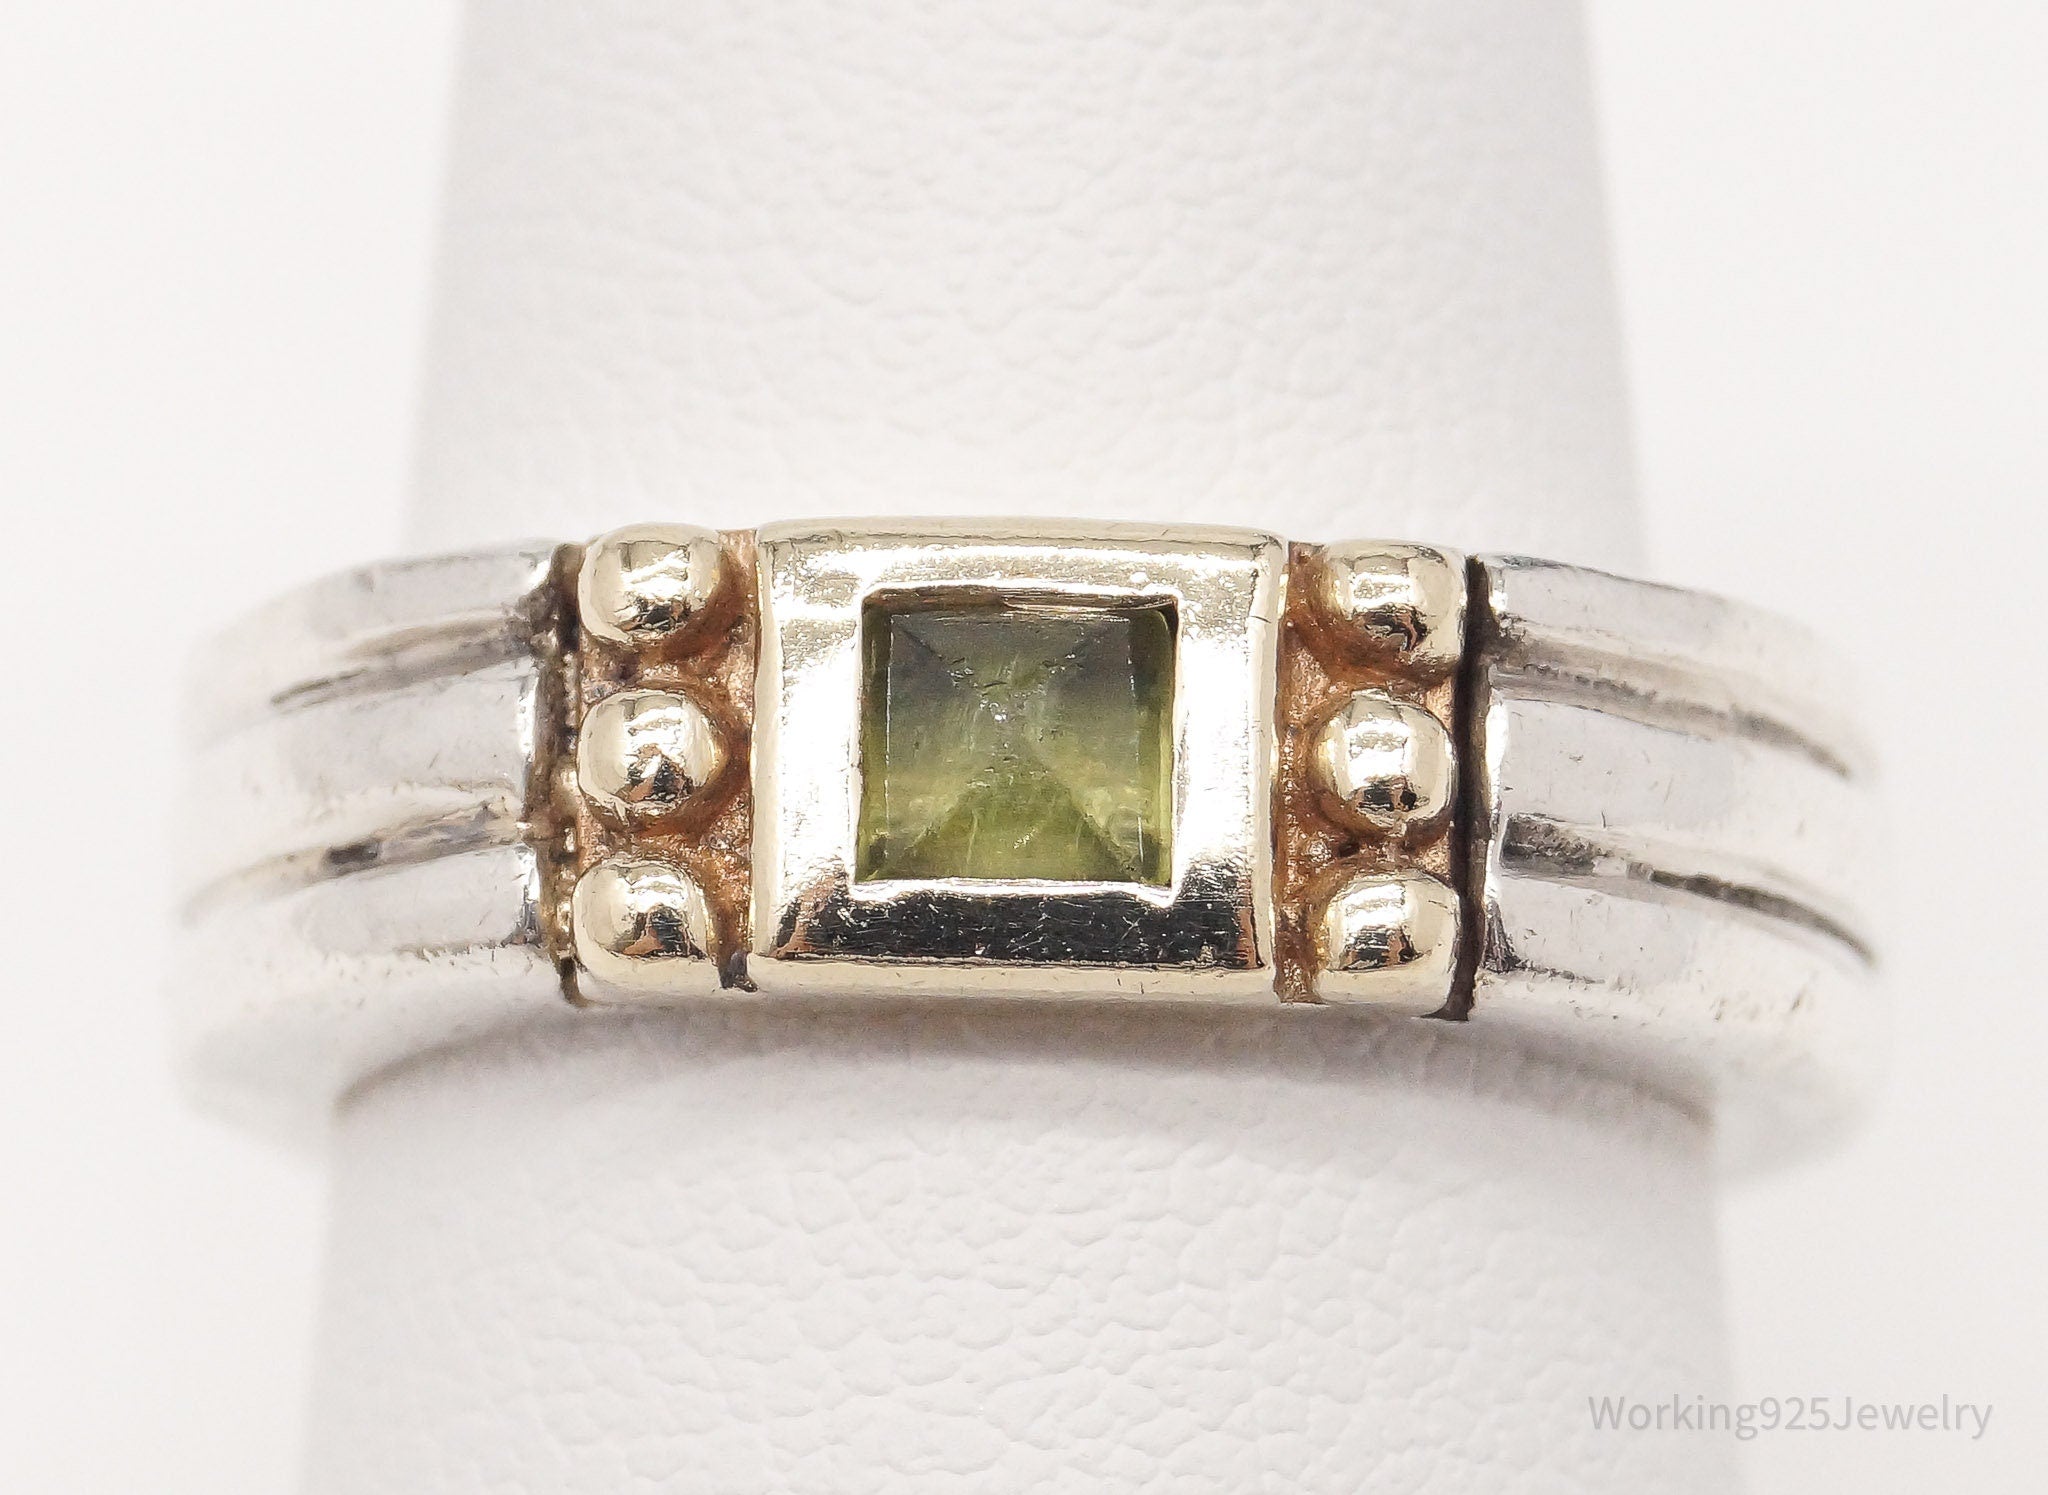 Vintage 14K Yellow Gold Peridot Sterling Silver Ring - Size 7.5